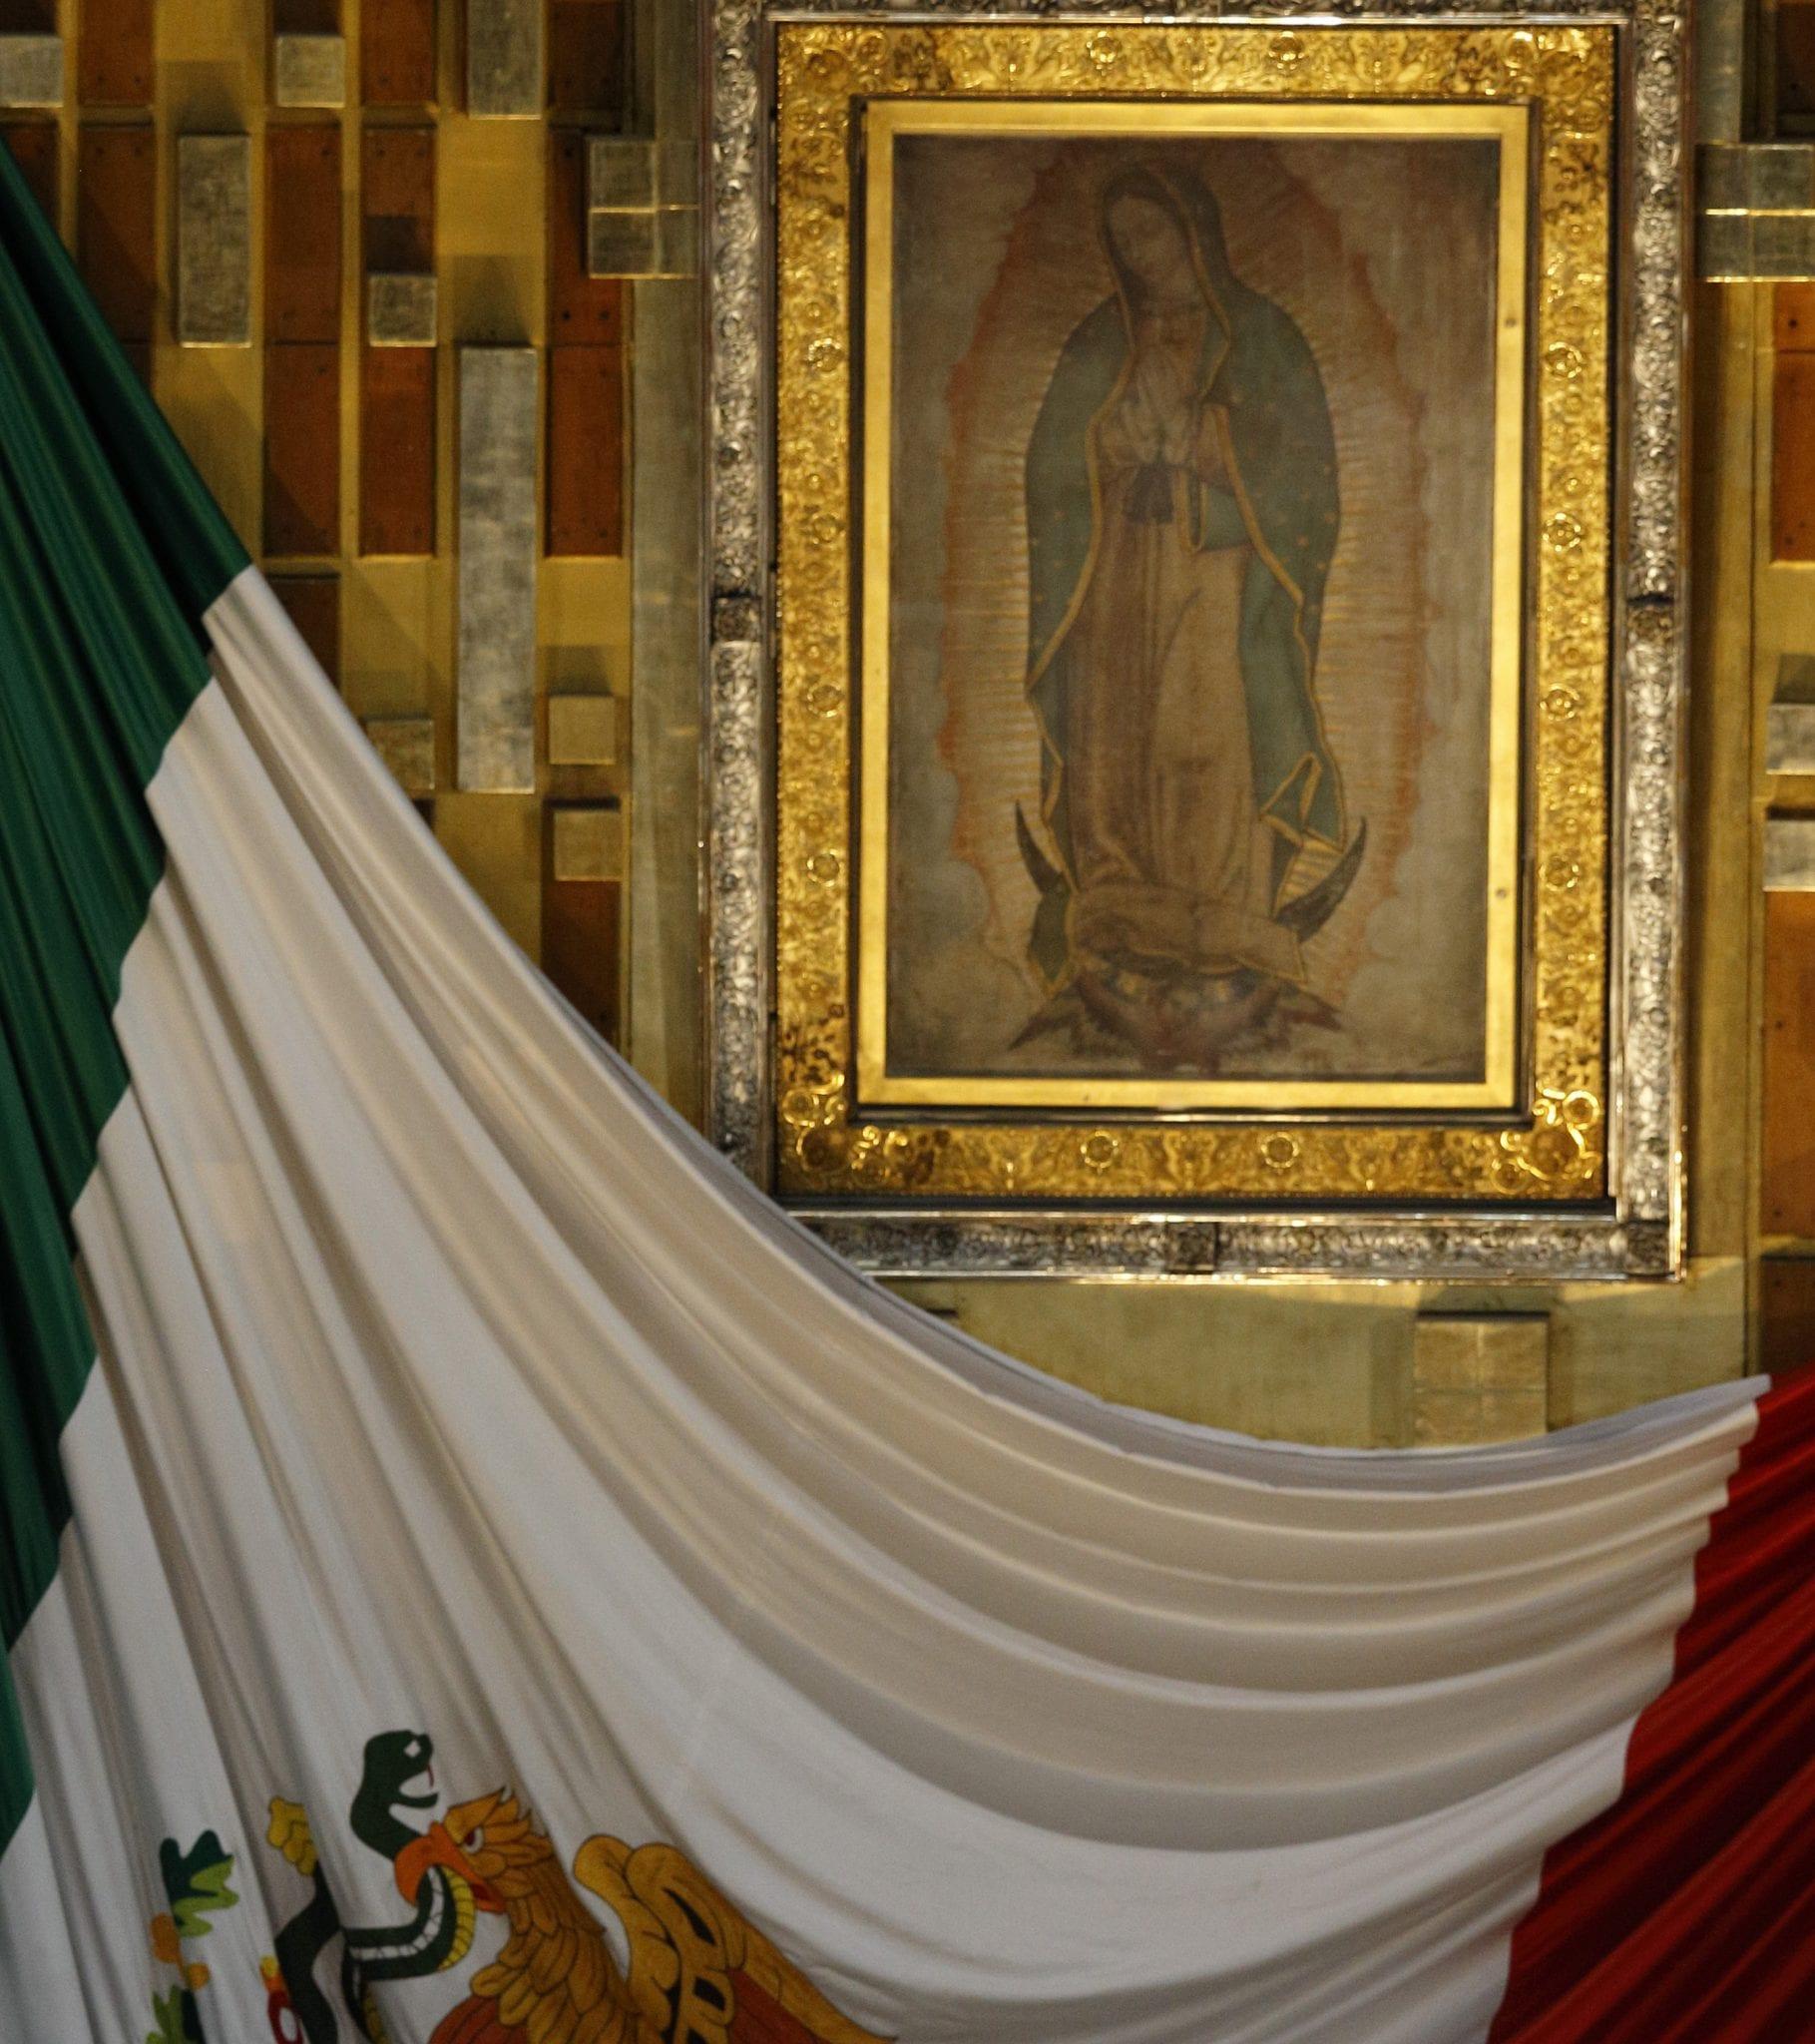 Bishops dedicate Americas to Our Lady of Guadalupe during pandemic